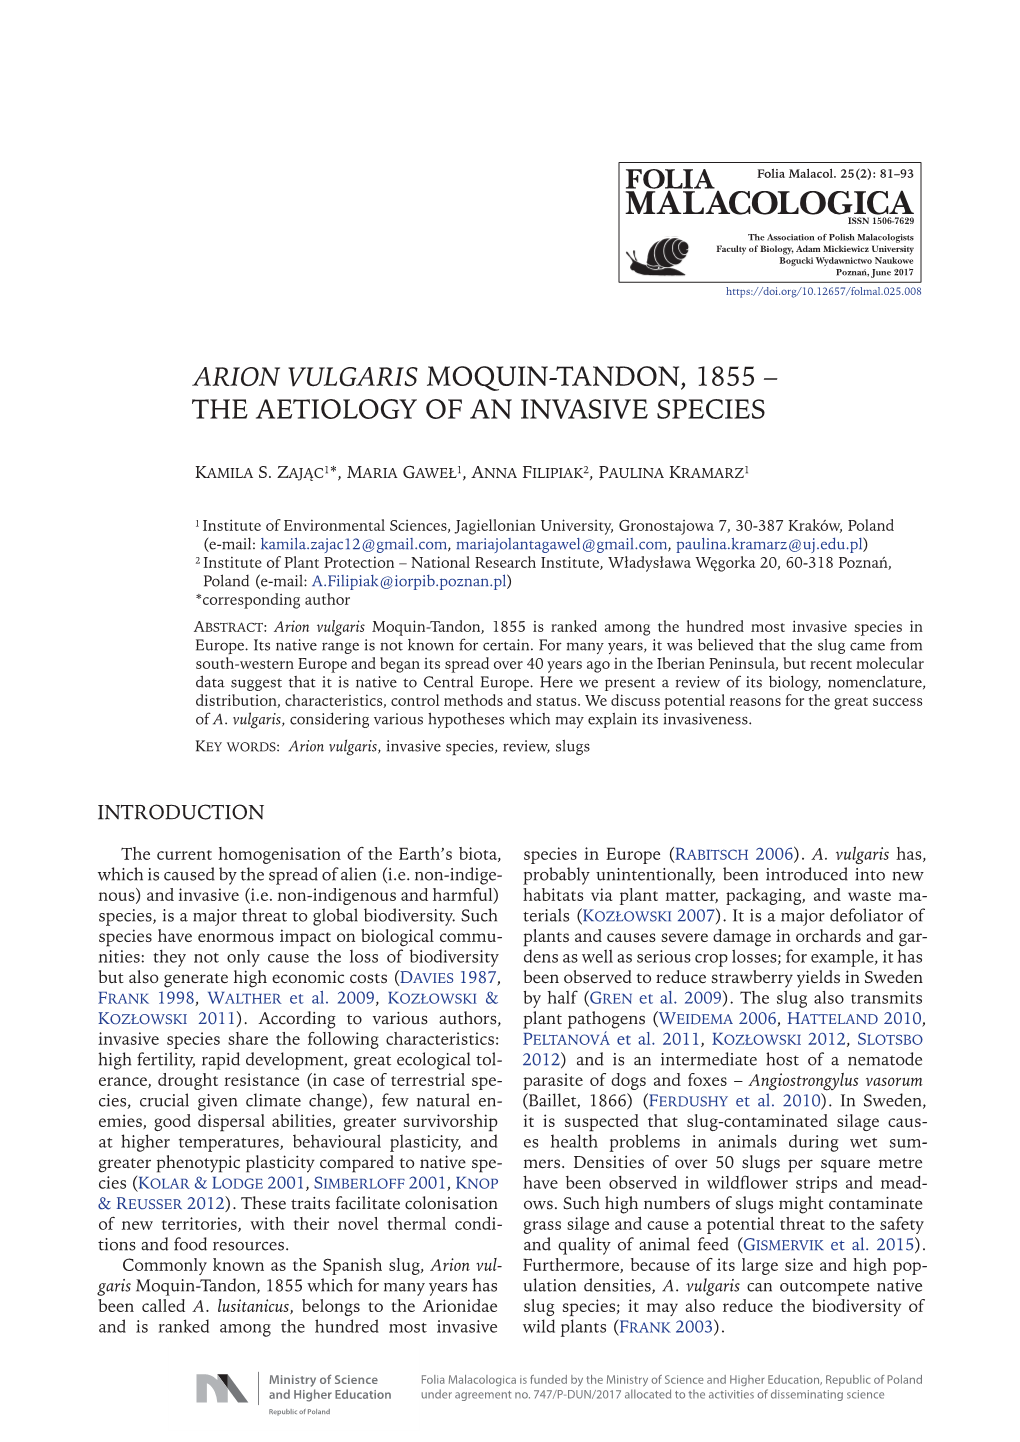 Arion Vulgaris Moquin-Tandon, 1855 – the Aetiology of an Invasive Species